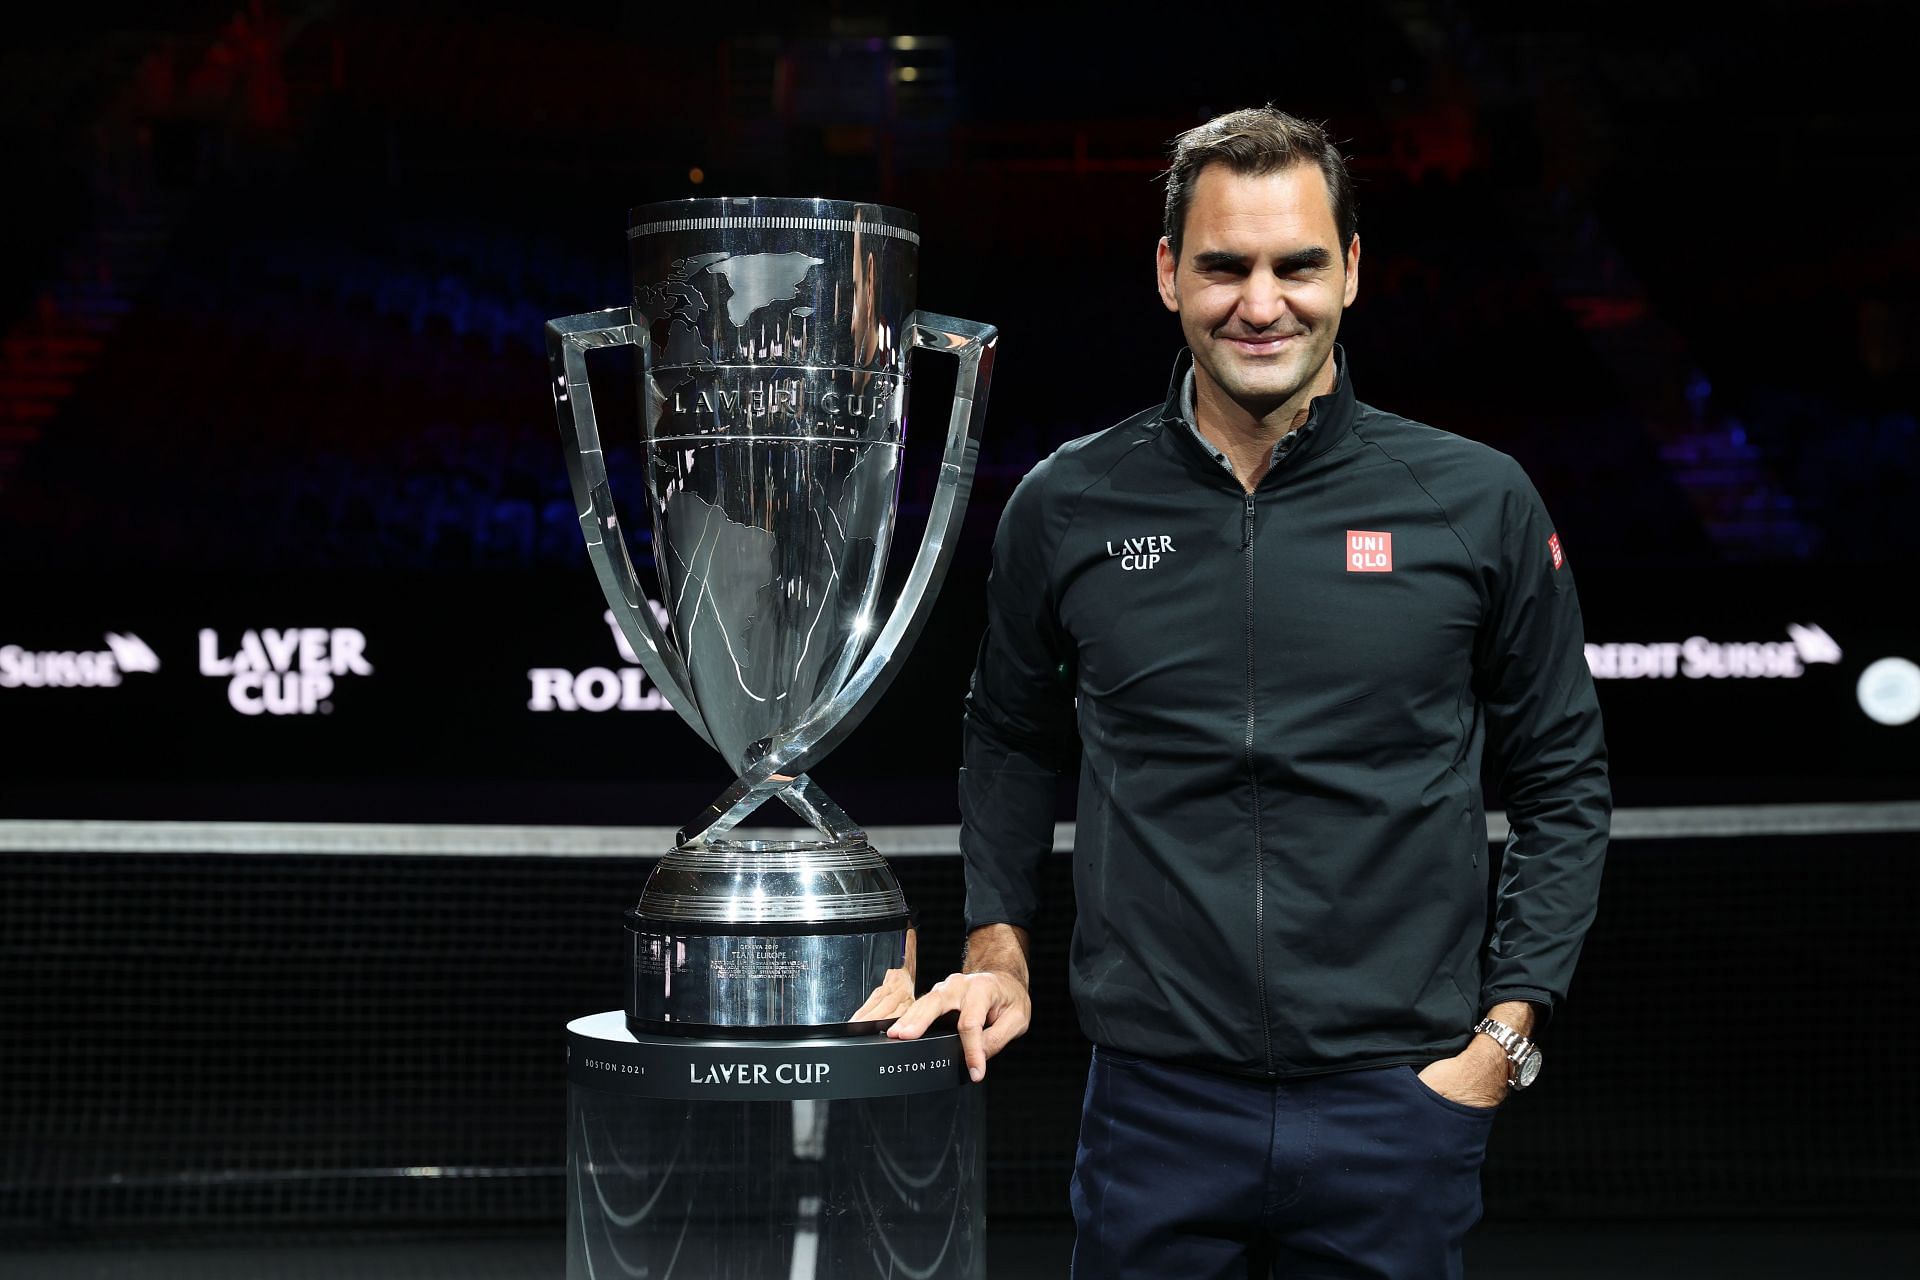 Roger Federer is expected to take part in the 2022 Laver Cup.